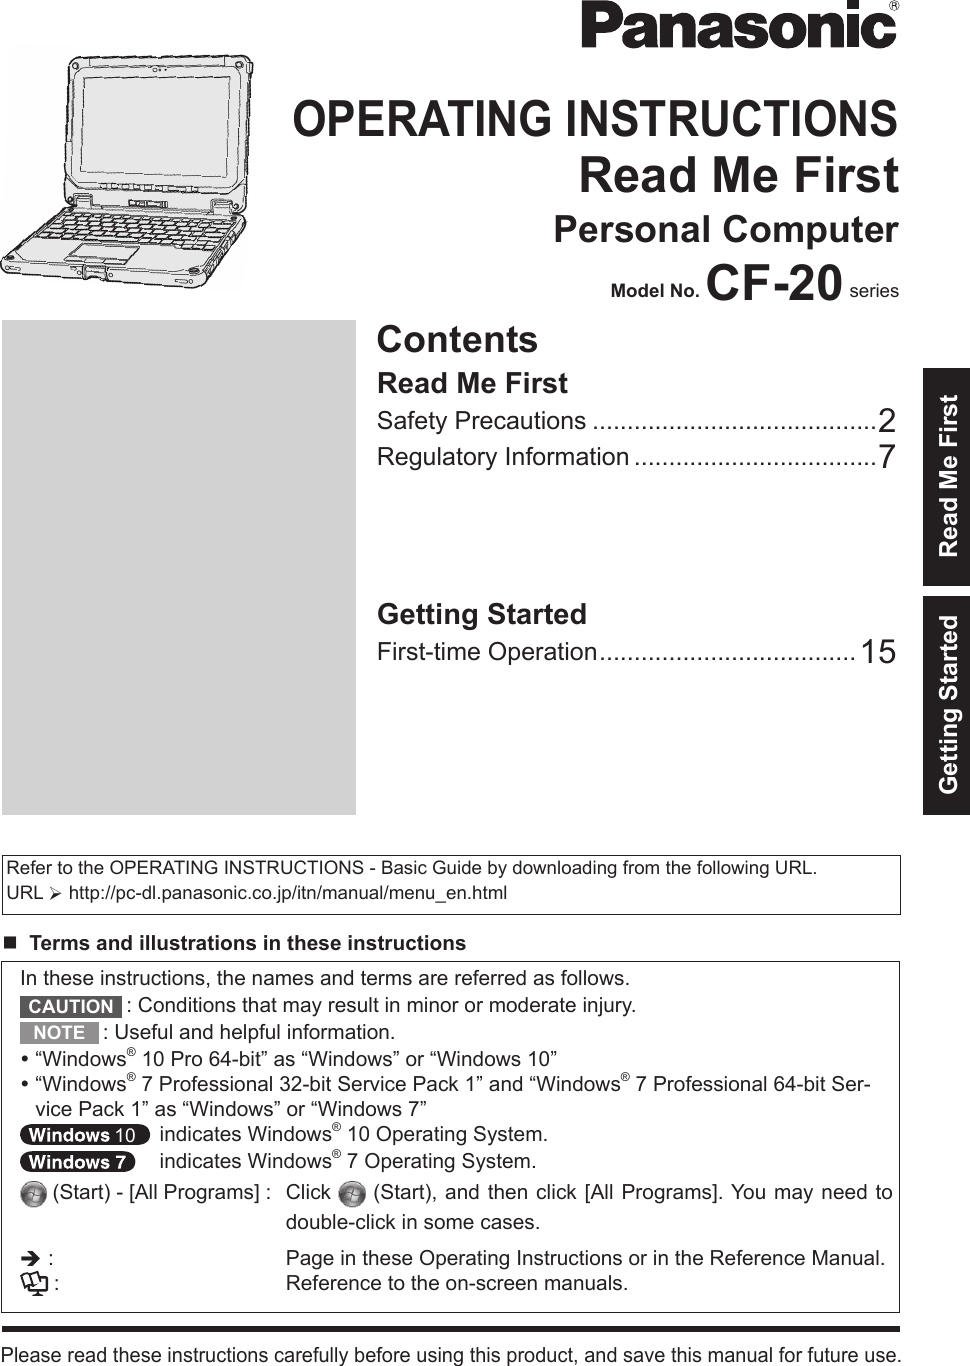 ContentsOPERATING INSTRUCTIONSRead Me FirstPersonal ComputerModel No. CF-20 seriesPlease read these instructions carefully before using this product, and save this manual for future use.Getting Started Read Me FirstIn these instructions, the names and terms are referred as follows.: Conditions that may result in minor or moderate injury.: Useful and helpful information.“Windows® 10 Pro 64-bit” as “Windows” or “Windows 10”“Windows® 7 Professional 32-bit Service Pack 1” and “Windows® 7 Professional 64-bit Ser-vice Pack 1” as “Windows” or “Windows 7” indicates Windows® 10 Operating System. indicates Windows® 7 Operating System. (Start) - [All Programs] :  Click   (Start), and then click [All Programs]. You may need to double-click in some cases.è: Page in these Operating Instructions or in the Reference Manual.: Reference to the on-screen manuals.Getting StartedFirst-time Operation .....................................15Read Me FirstSafety Precautions .........................................2Regulatory Information ...................................7Refer to the OPERATING INSTRUCTIONS - Basic Guide by downloading from the following URL.URL Øhttp://pc-dl.panasonic.co.jp/itn/manual/menu_en.htmlnTerms and illustrations in these instructionsCAUTIONNOTE10